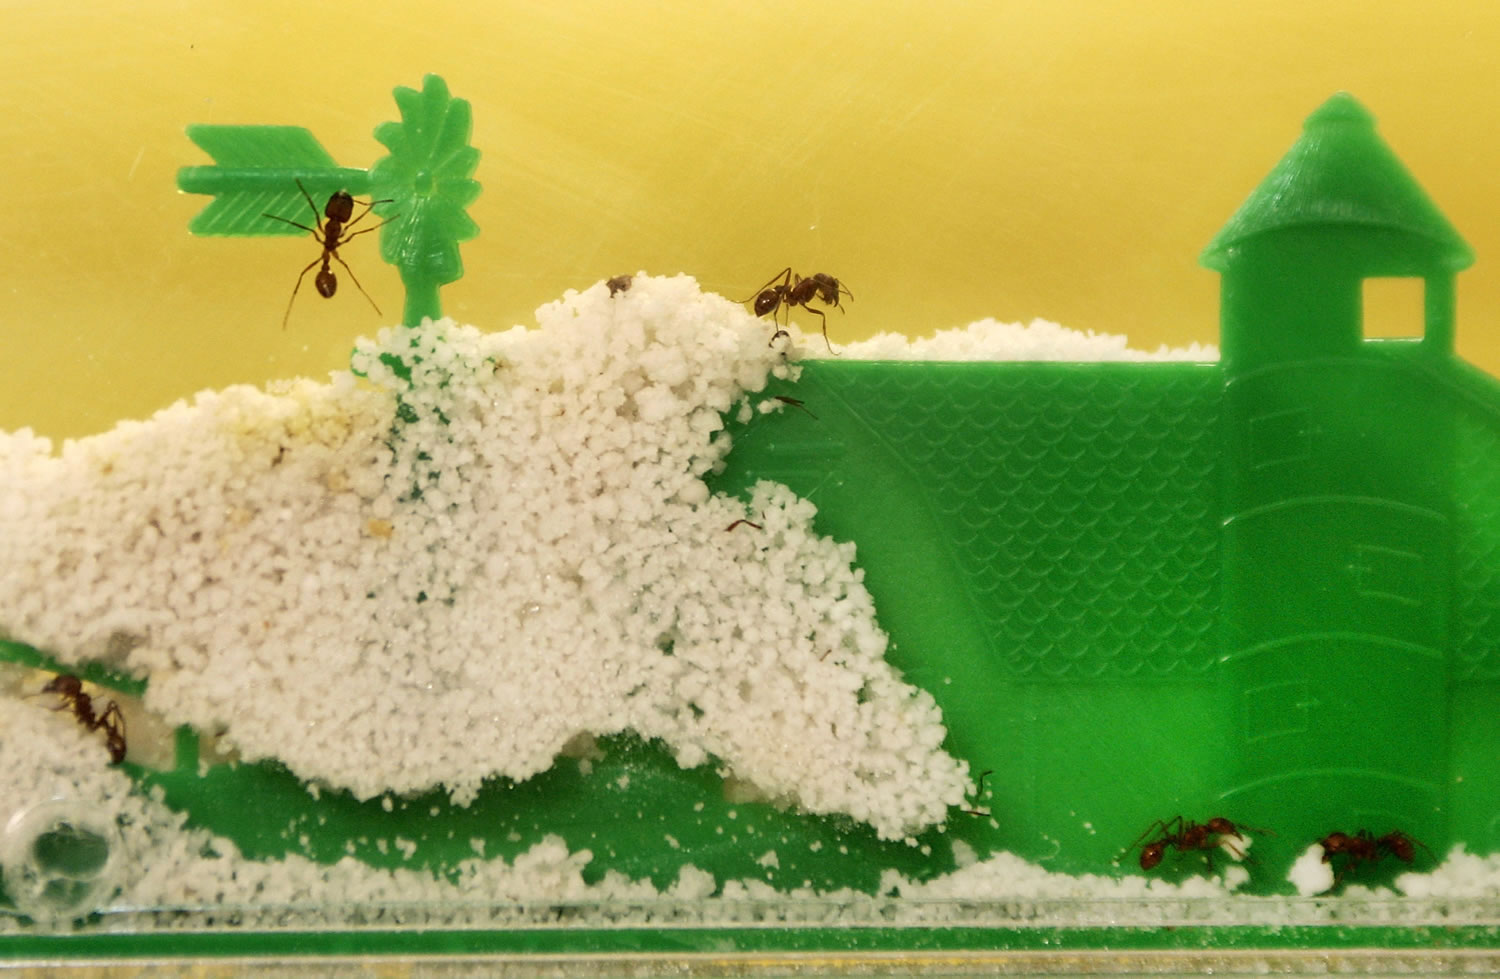 Ant farms, the narrow glass or plastic containers filled with soil that trick the insects into believing they're underground, have been popular for generations.